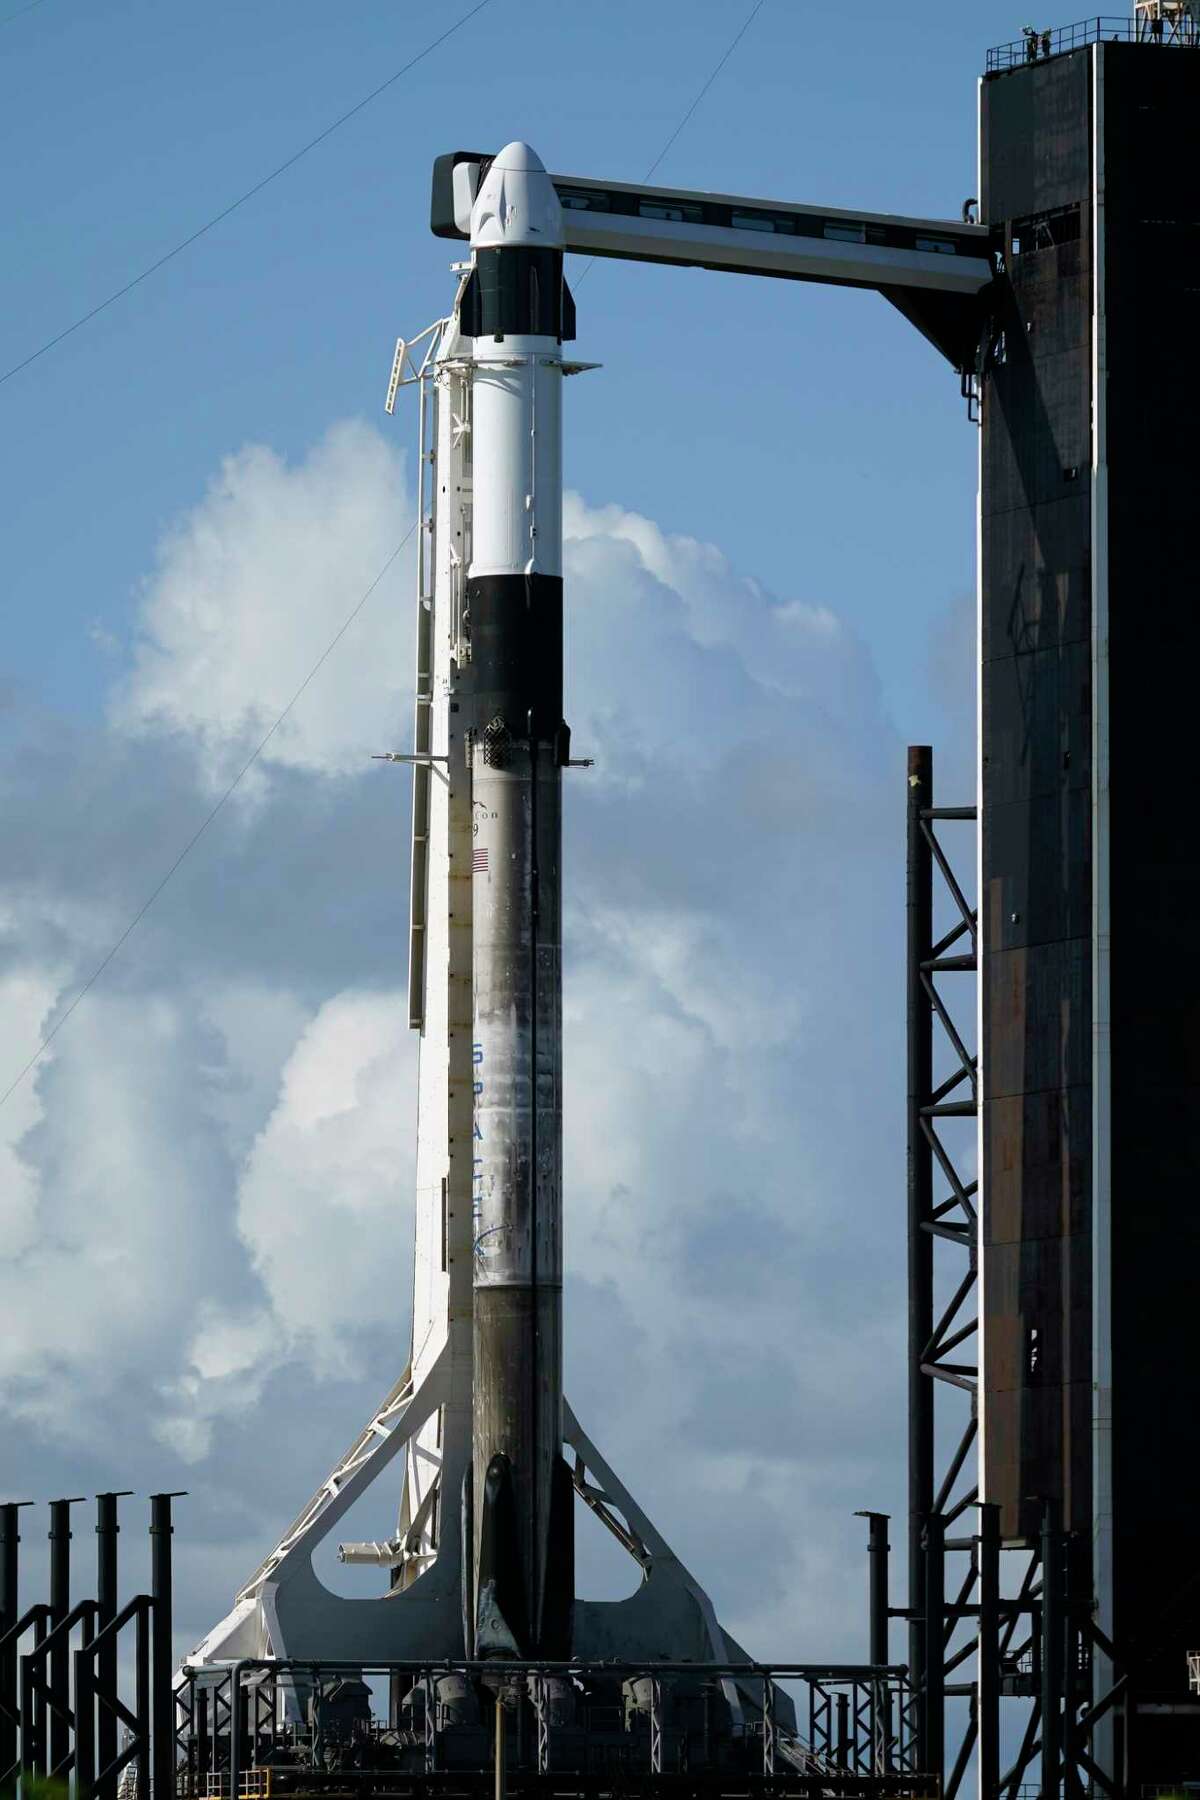 Workers stand on the service structure as a SpaceX Falcon 9 rocket sits on Kennedy Space Center's Launch Pad 39-A in Cape Canaveral, Fla., on Wednesday, Sept. 15, 2021. For the first time in 60 years of human spaceflight, a rocket is poised to blast into orbit with no professional astronauts on board, only four tourists.